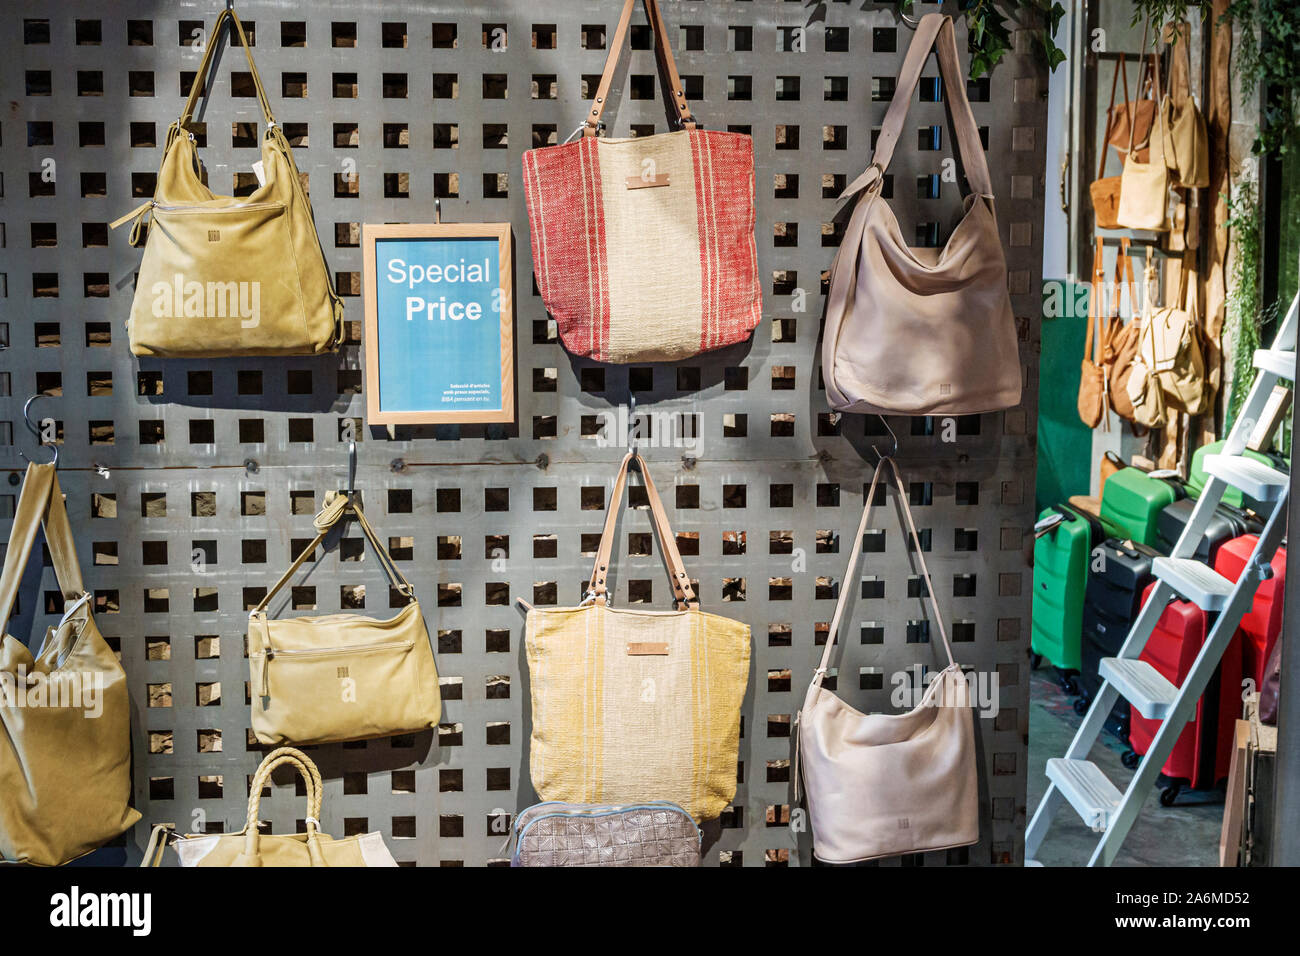 Biba Bags High Resolution Stock Photography and Images - Alamy